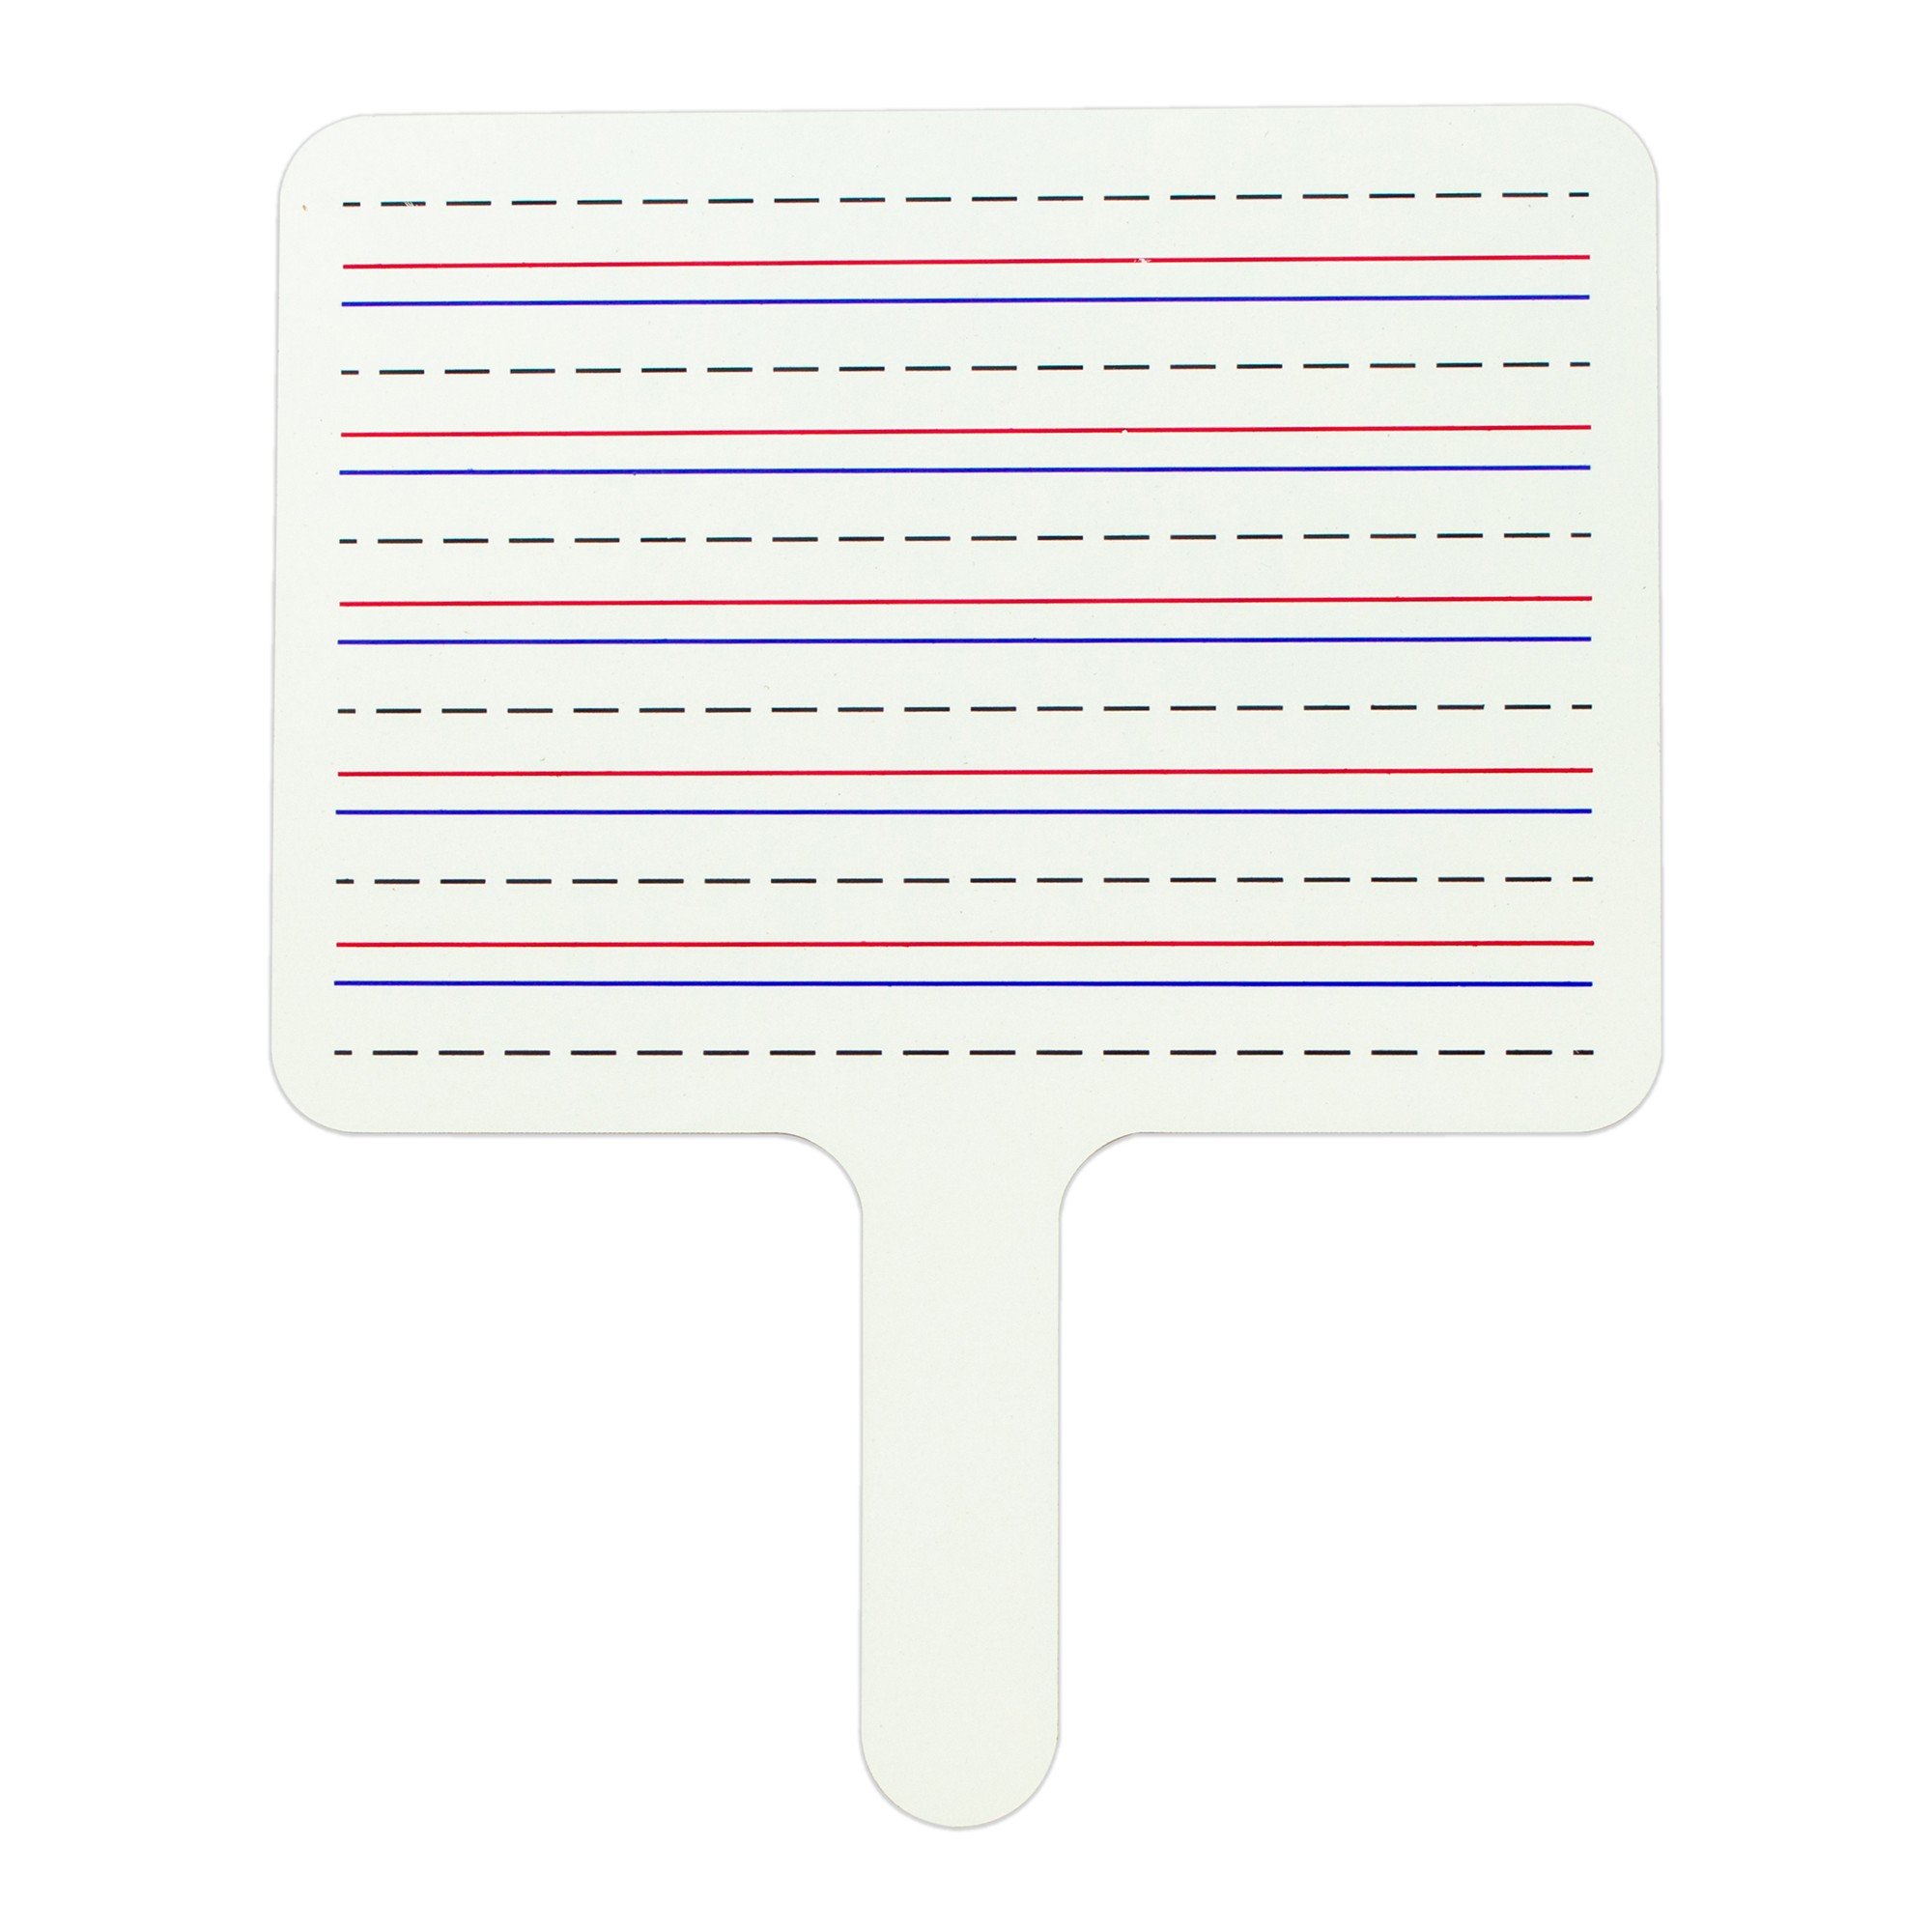 Two-Sided Dry Erase Answer Paddle